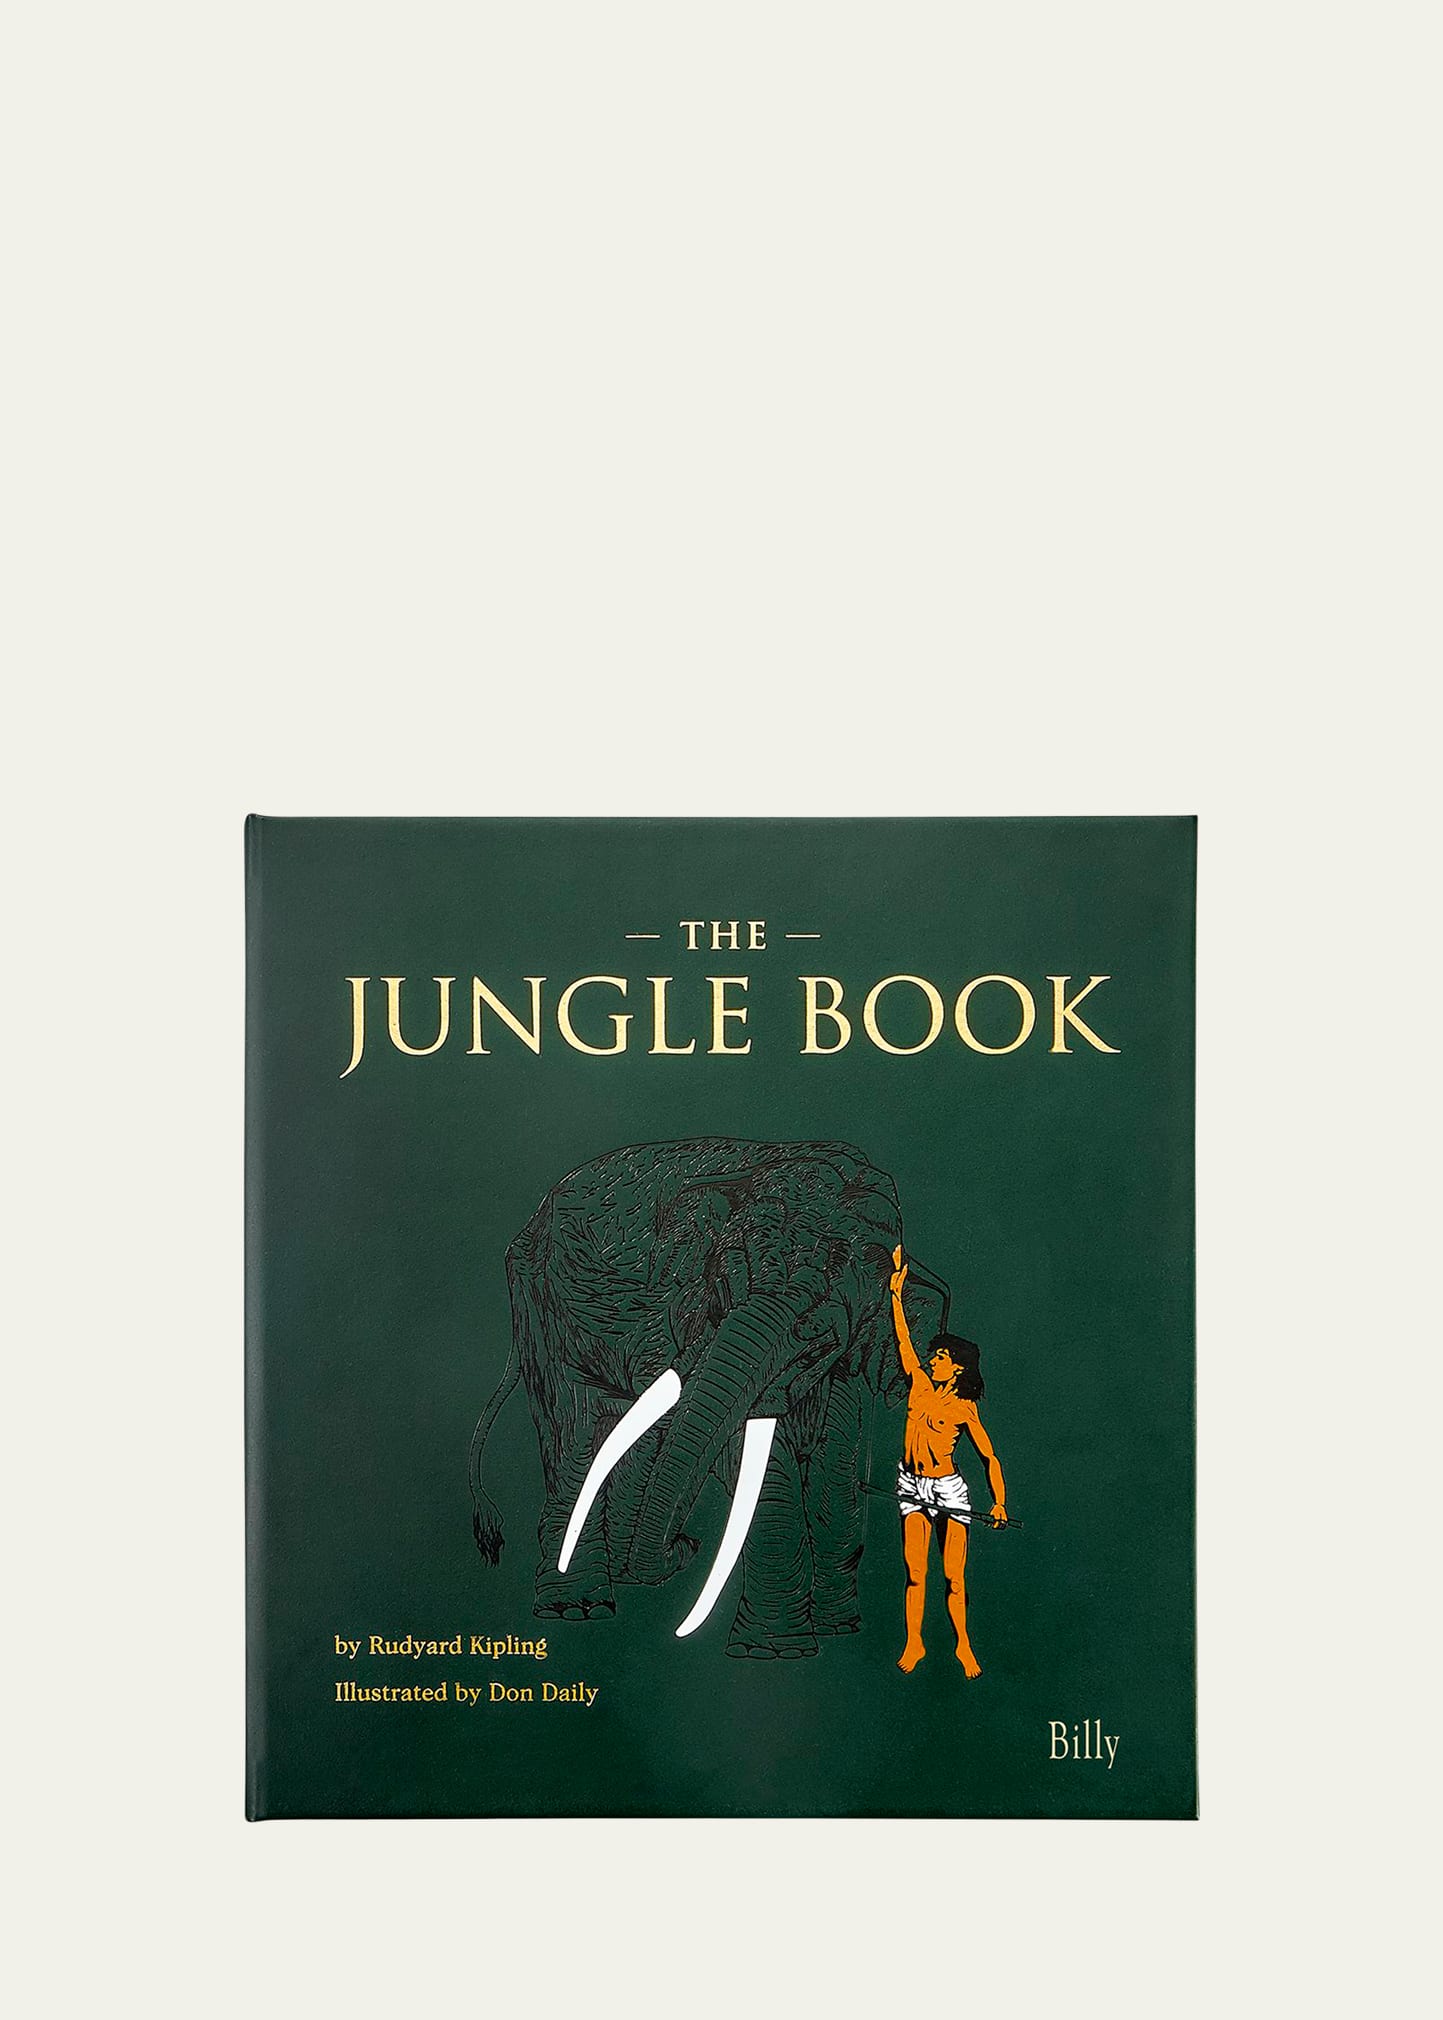 Personalized Leather Bound "The Jungle Book"